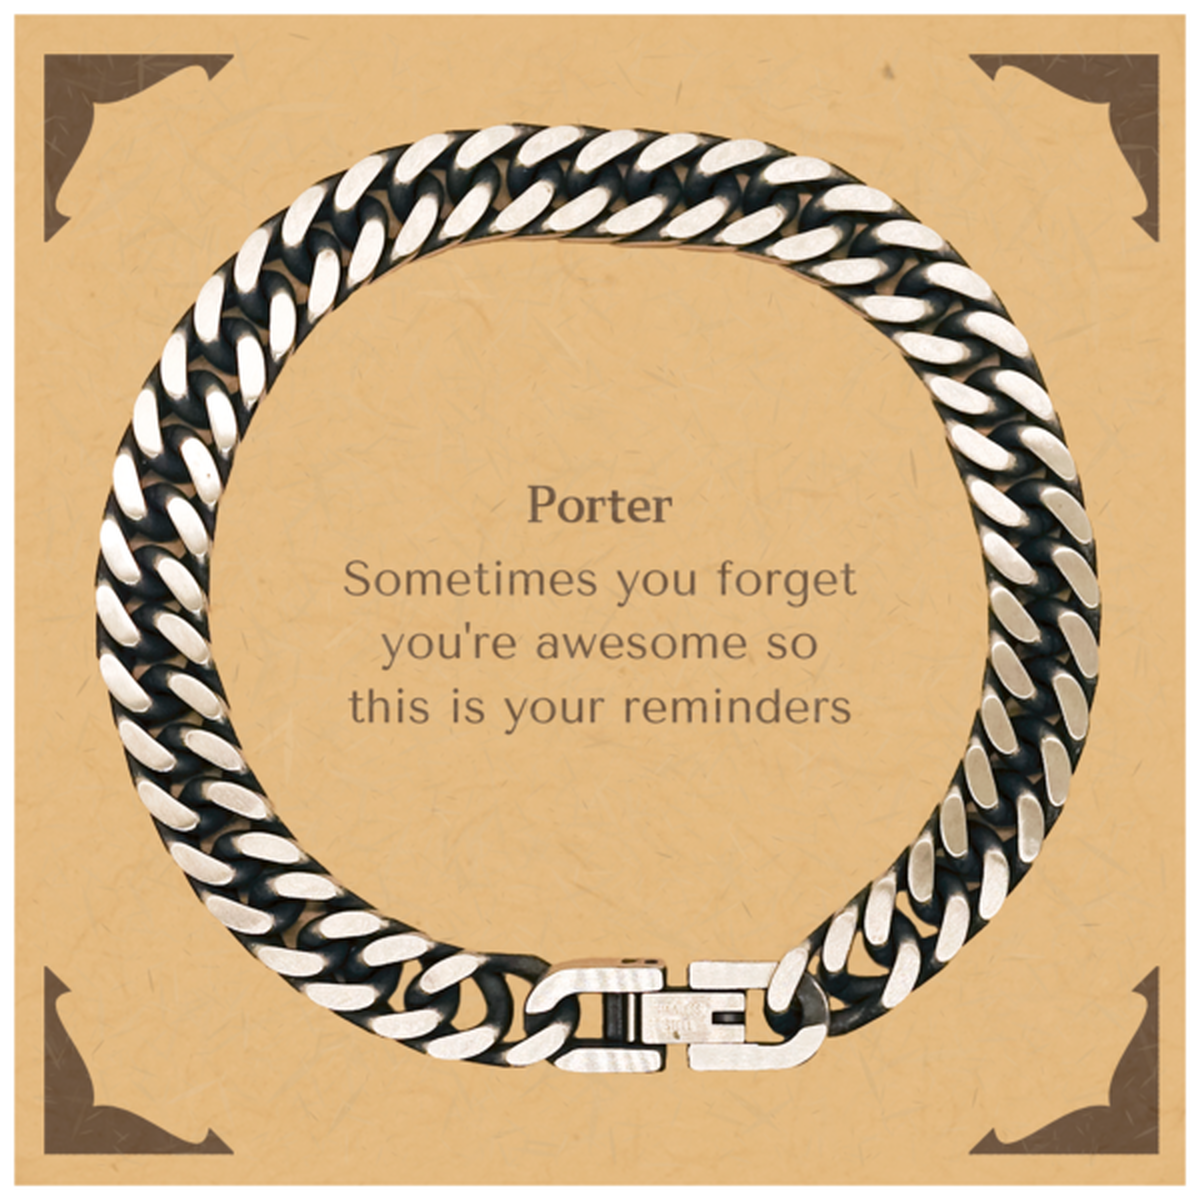 Sentimental Porter Cuban Link Chain Bracelet, Porter Sometimes you forget you're awesome so this is your reminders, Graduation Christmas Birthday Gifts for Porter, Men, Women, Coworkers